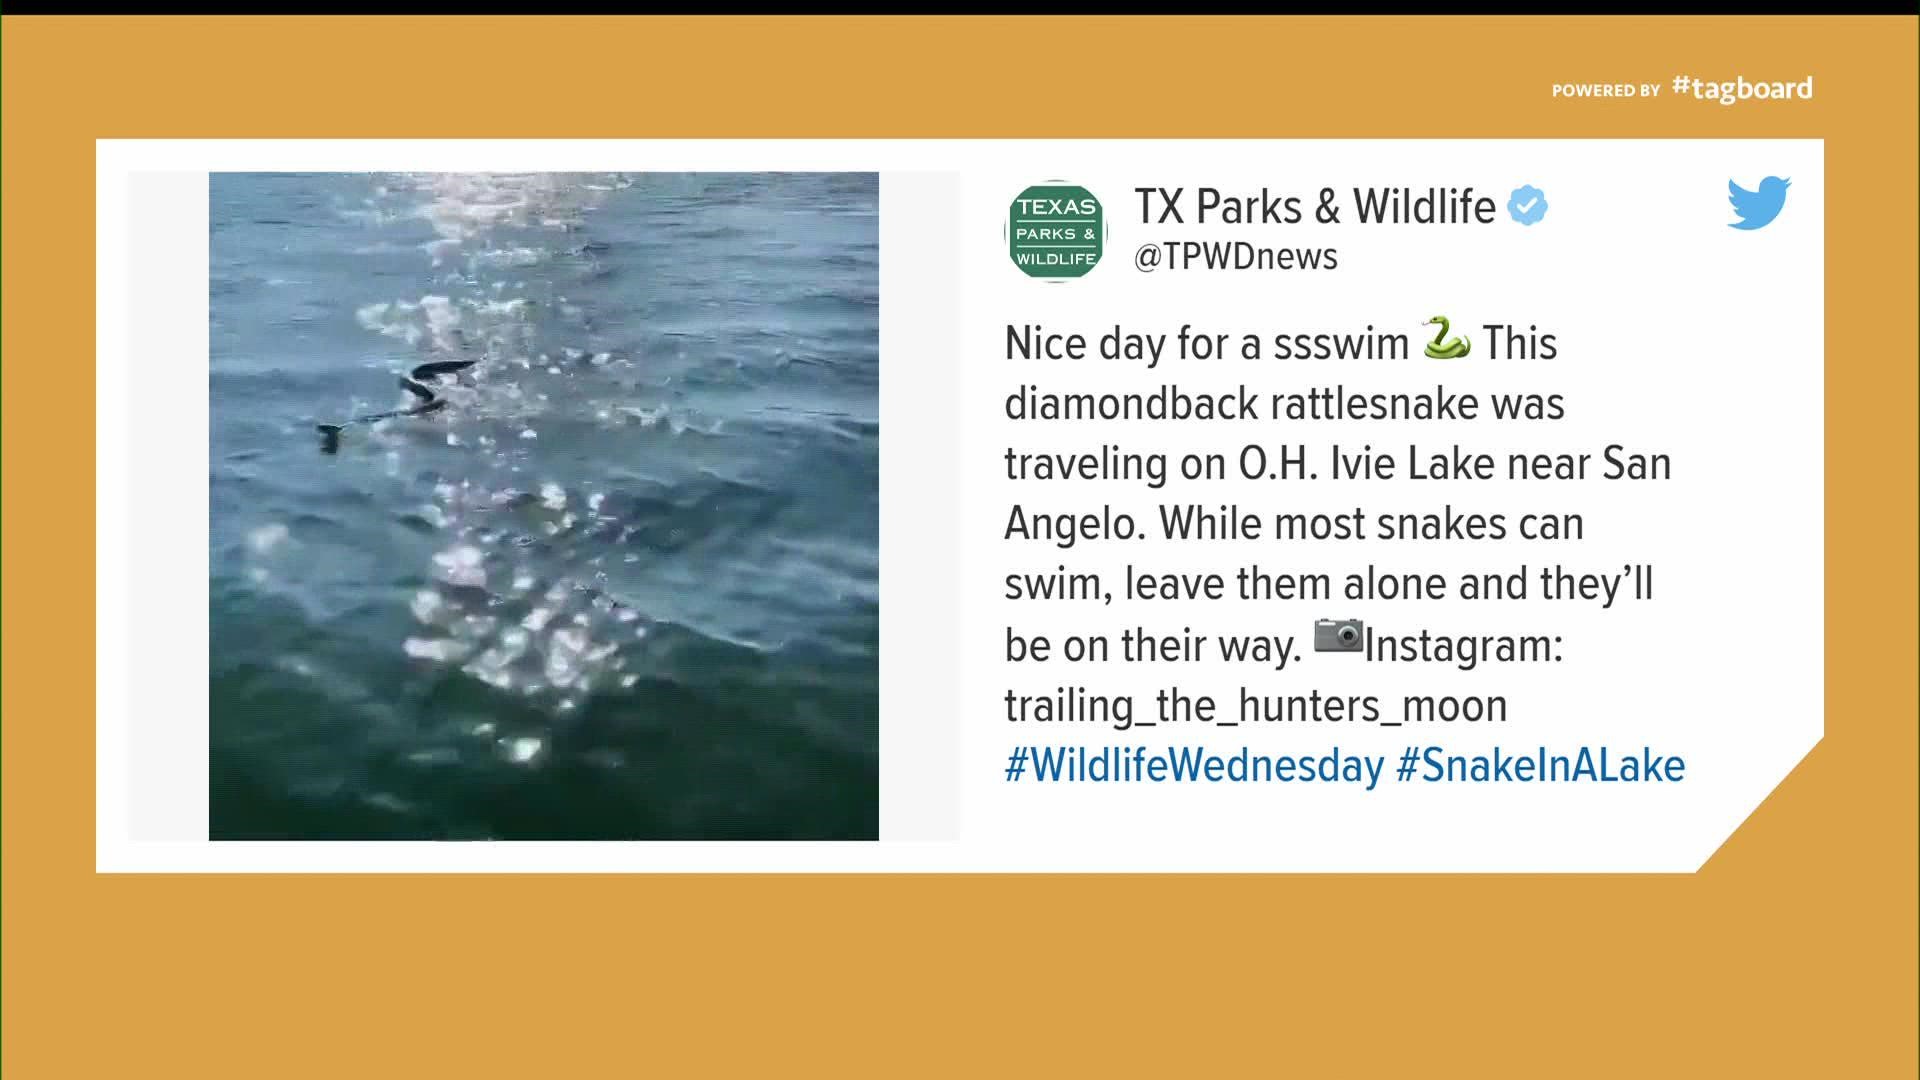 Seems like the Lone Star State's most common venomous snakes are trying to beat the heat, too. And yes, they can swim.